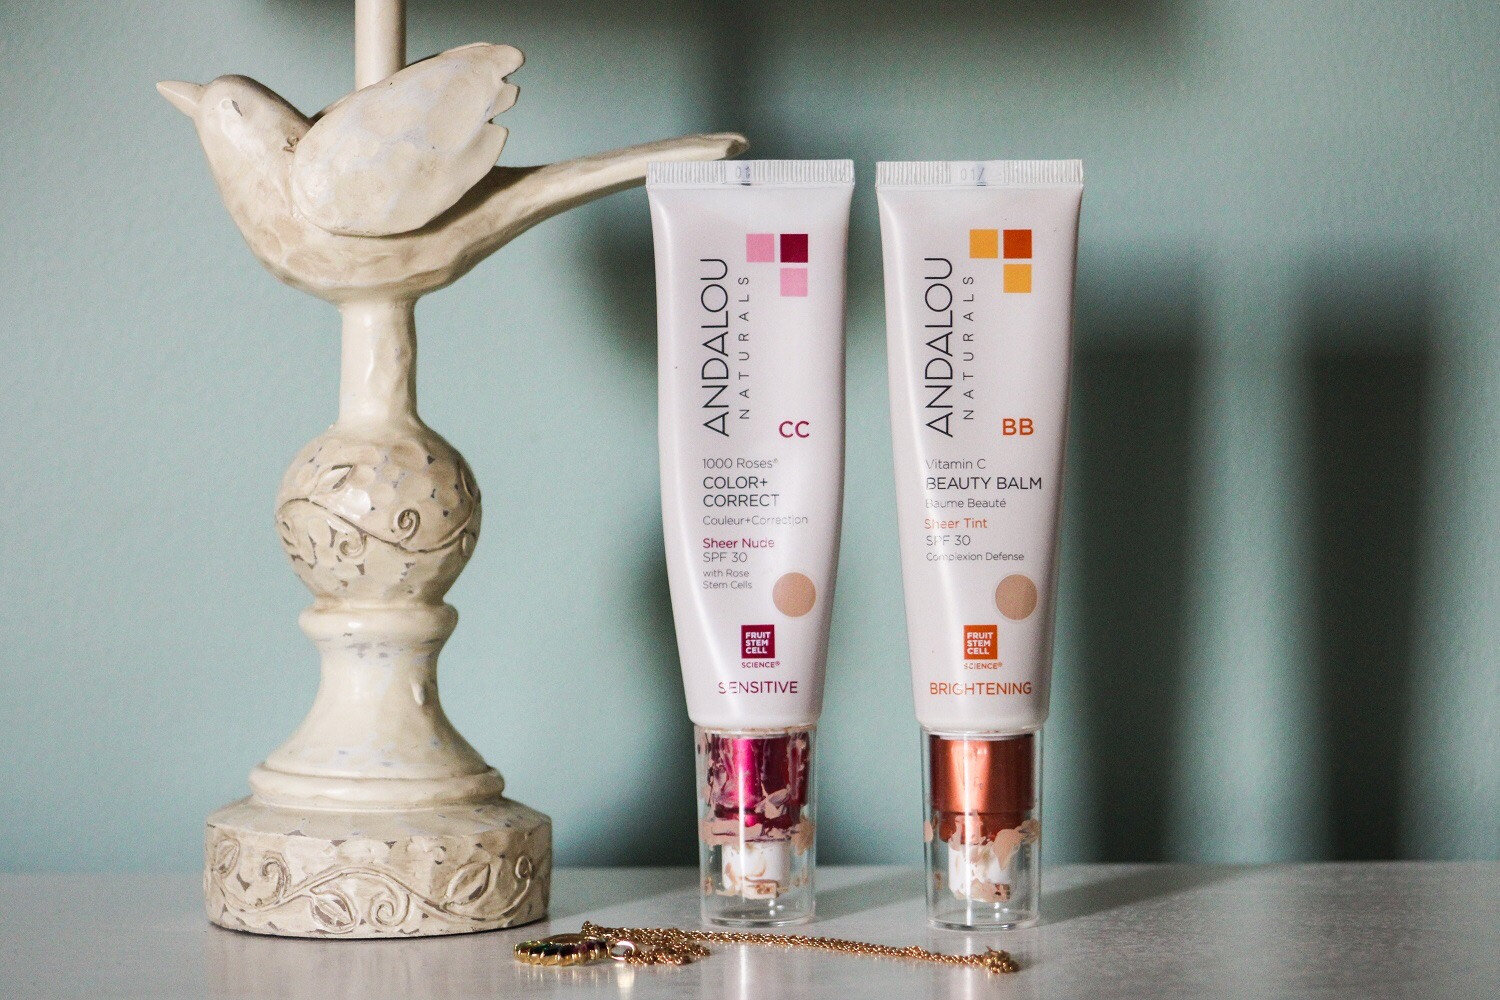 Clean beauty tinted moisturizers for minimal makeup